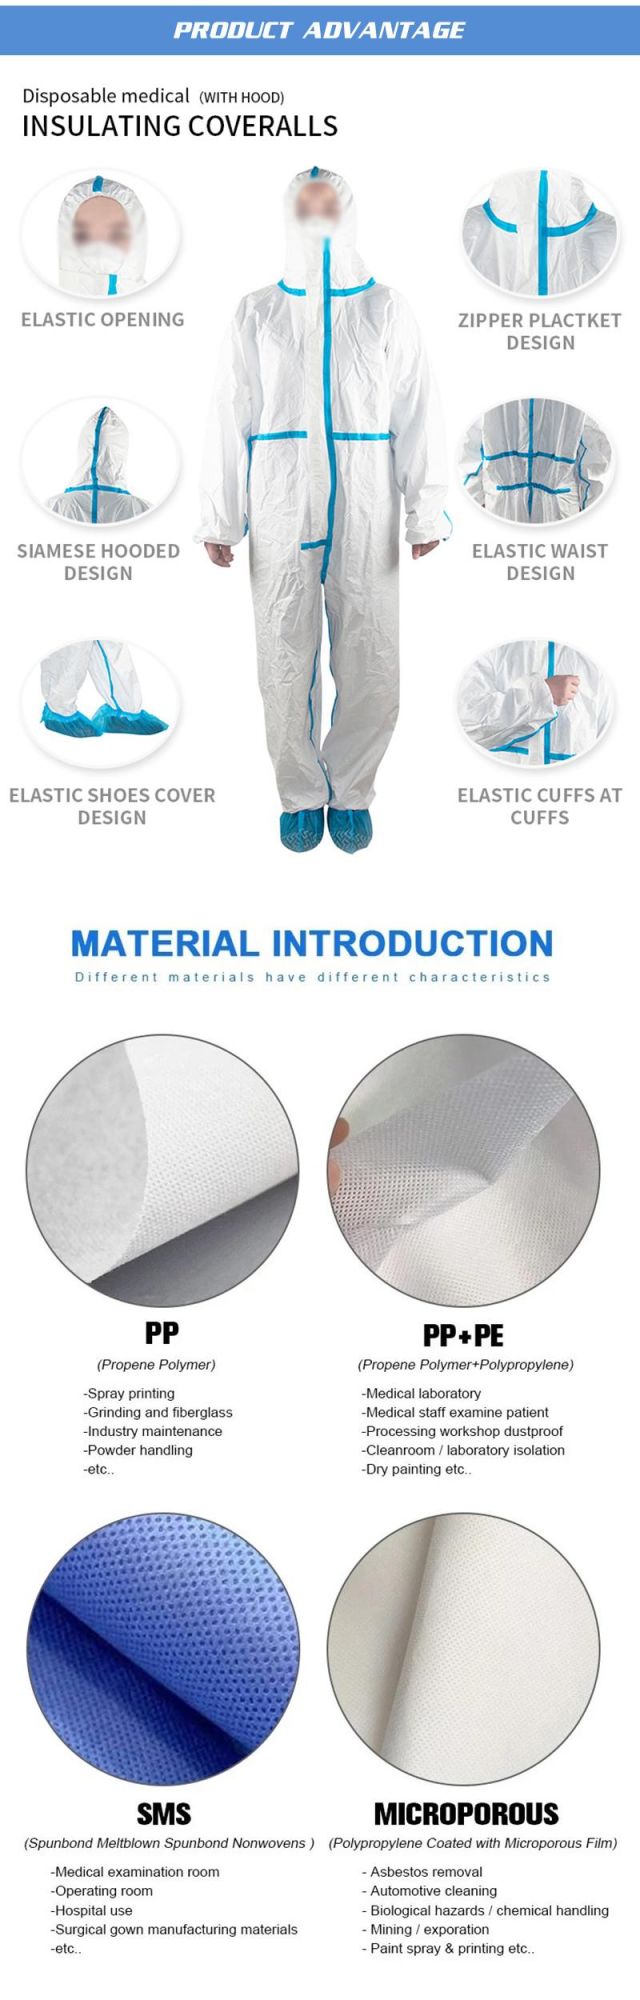 Professional Medical Isolation Gown Sterile Disposable Protective Coverall Clothing/Chemical/Lab/Work/Breathable/Uniform/